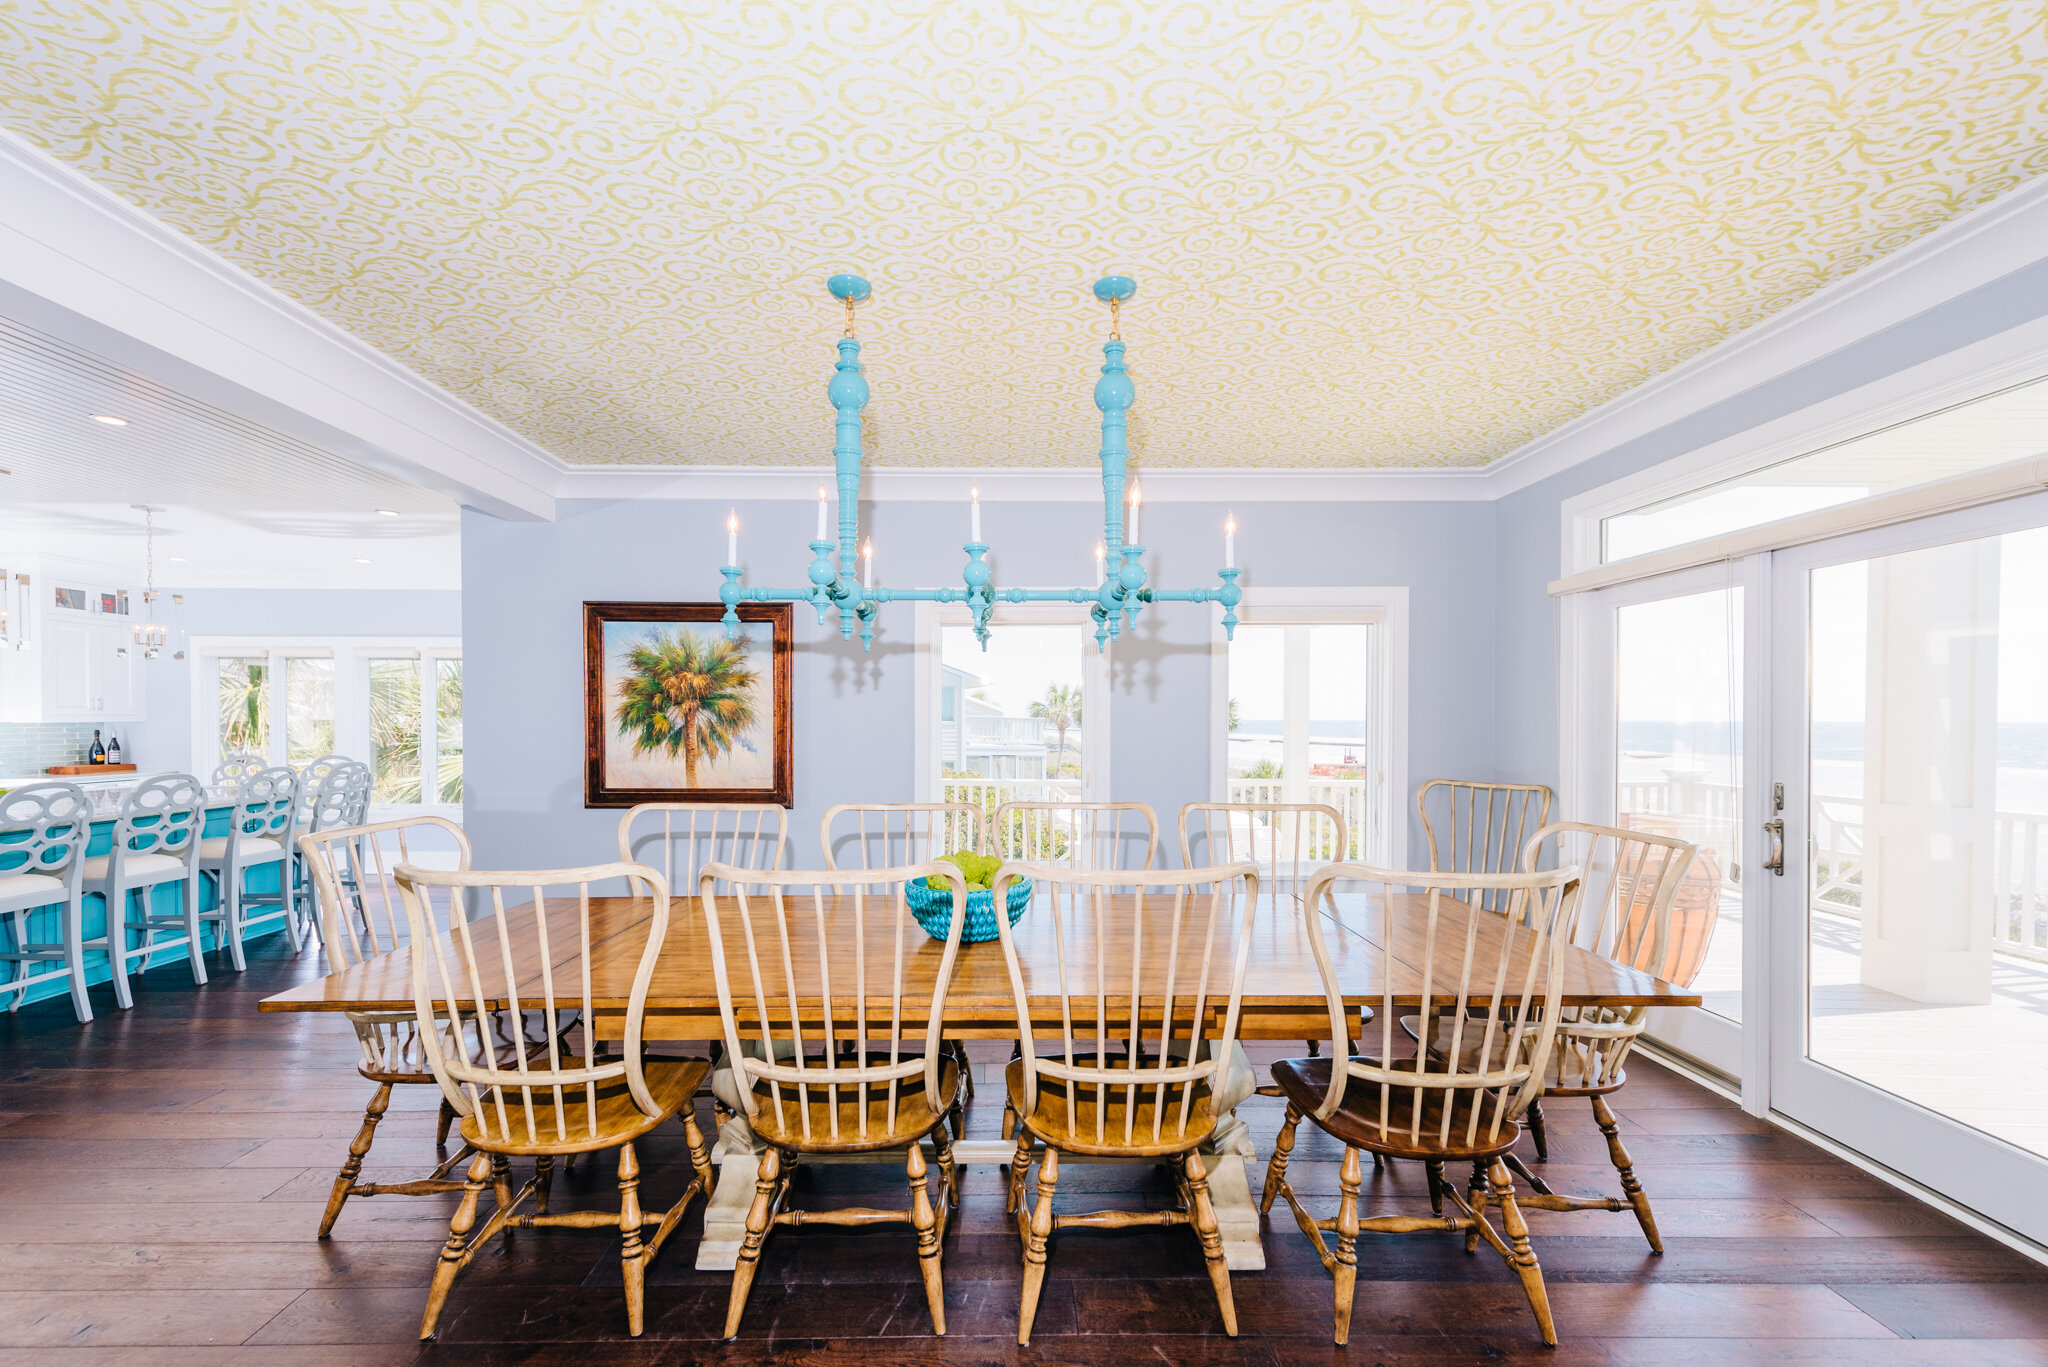 Dwell-Chic-Bright-Coastal-Home-Dining-Room-Overall.jpg